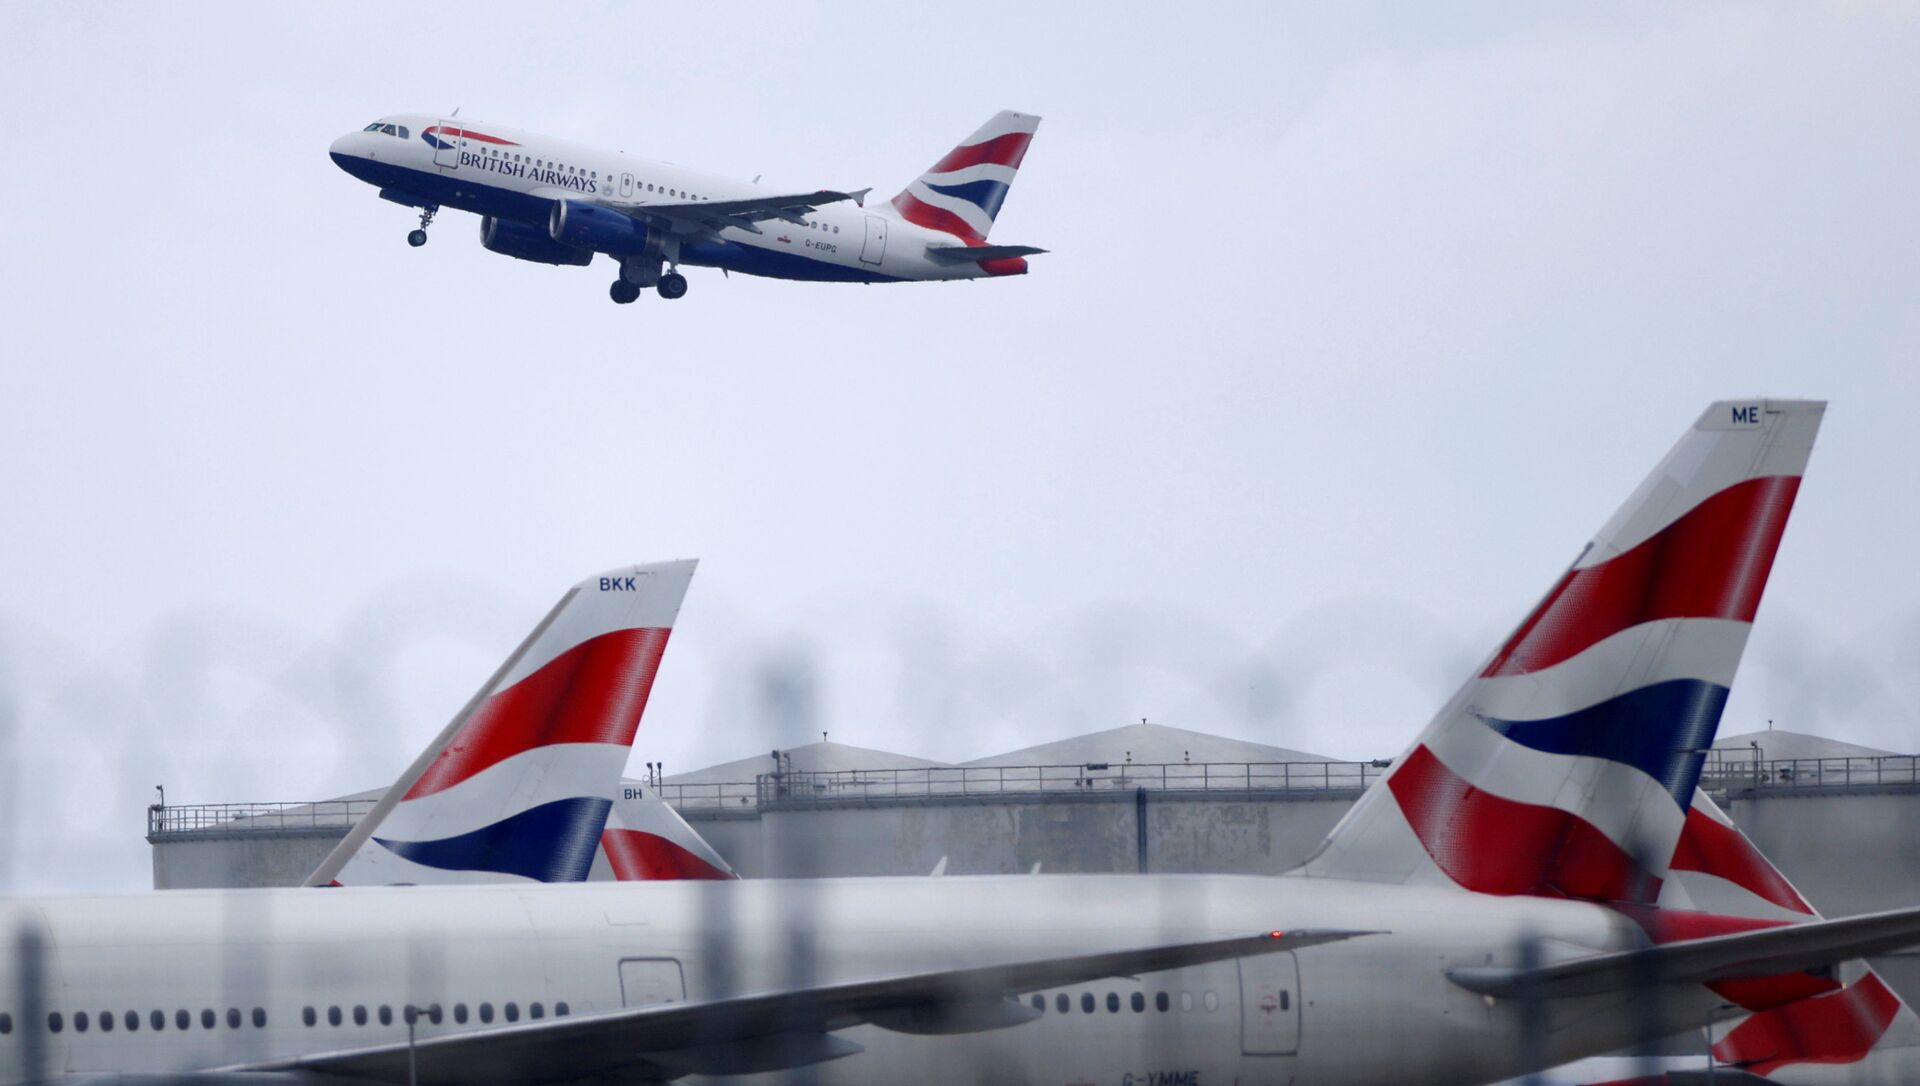 FILE PHOTO: BA Airbus A319 aircraft takes off from Heathrow Airport in London - Sputnik International, 1920, 25.08.2021